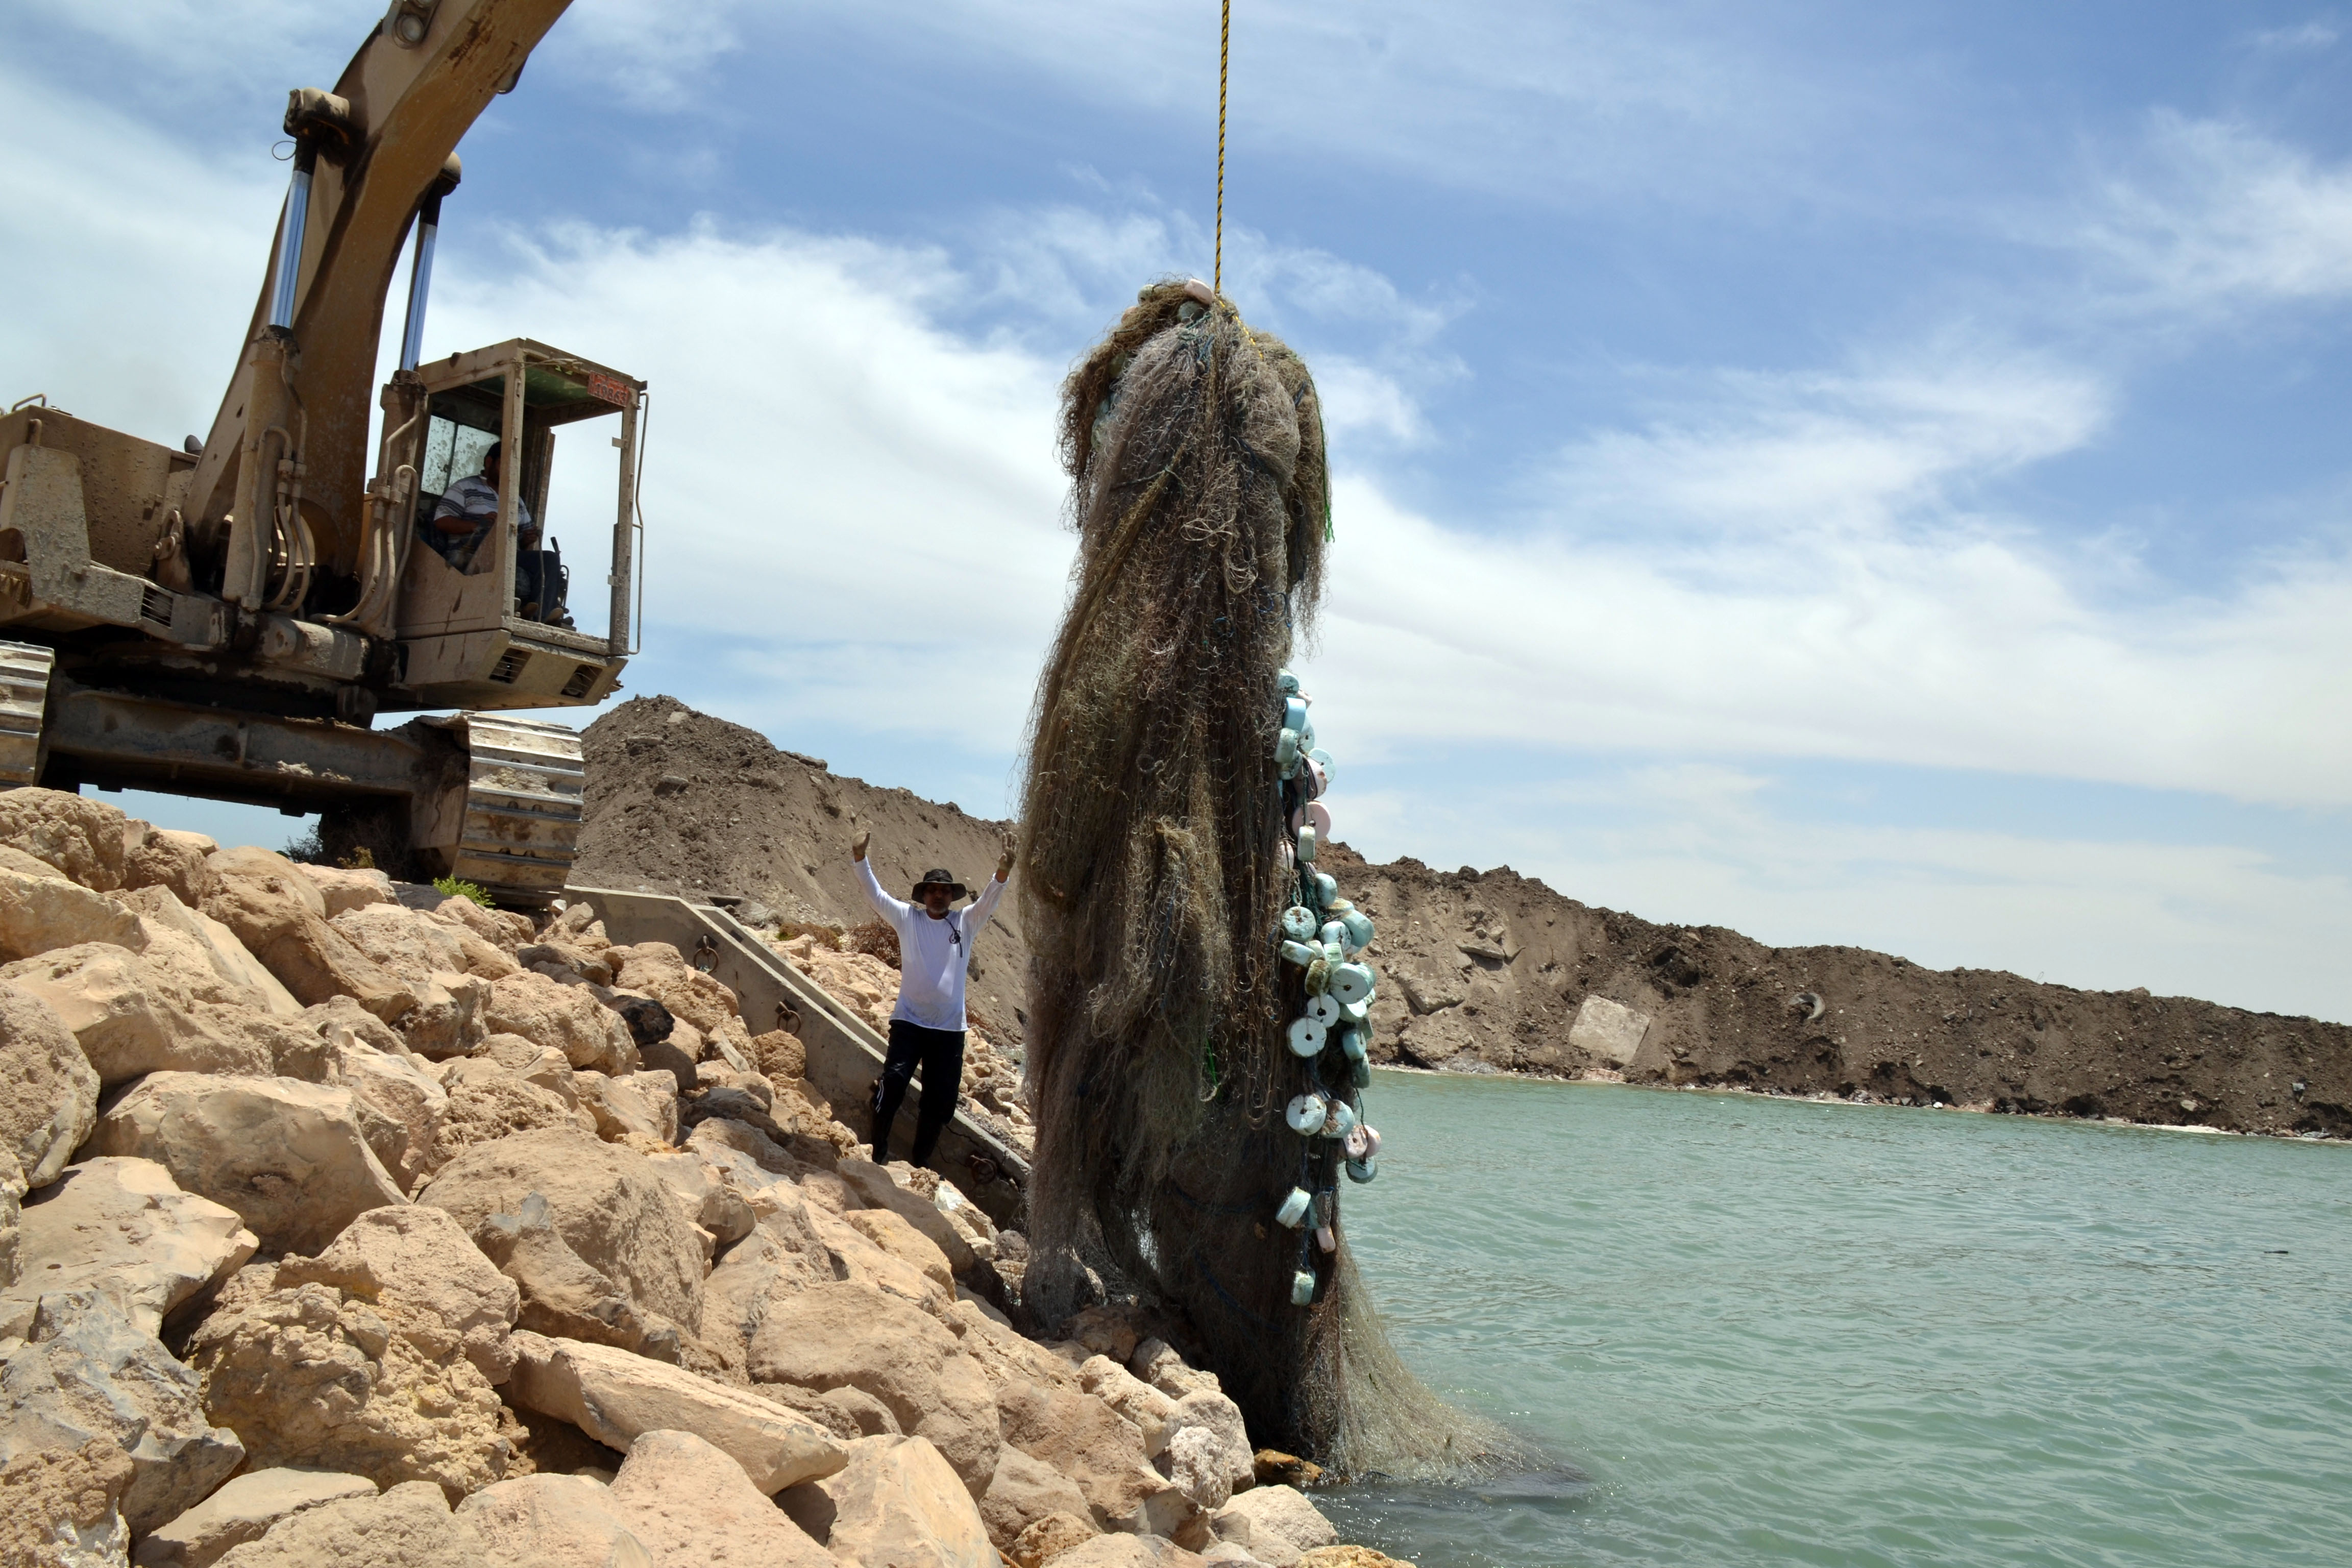 Kuwaiti divers lift 3-ton abandoned net from territorial waters